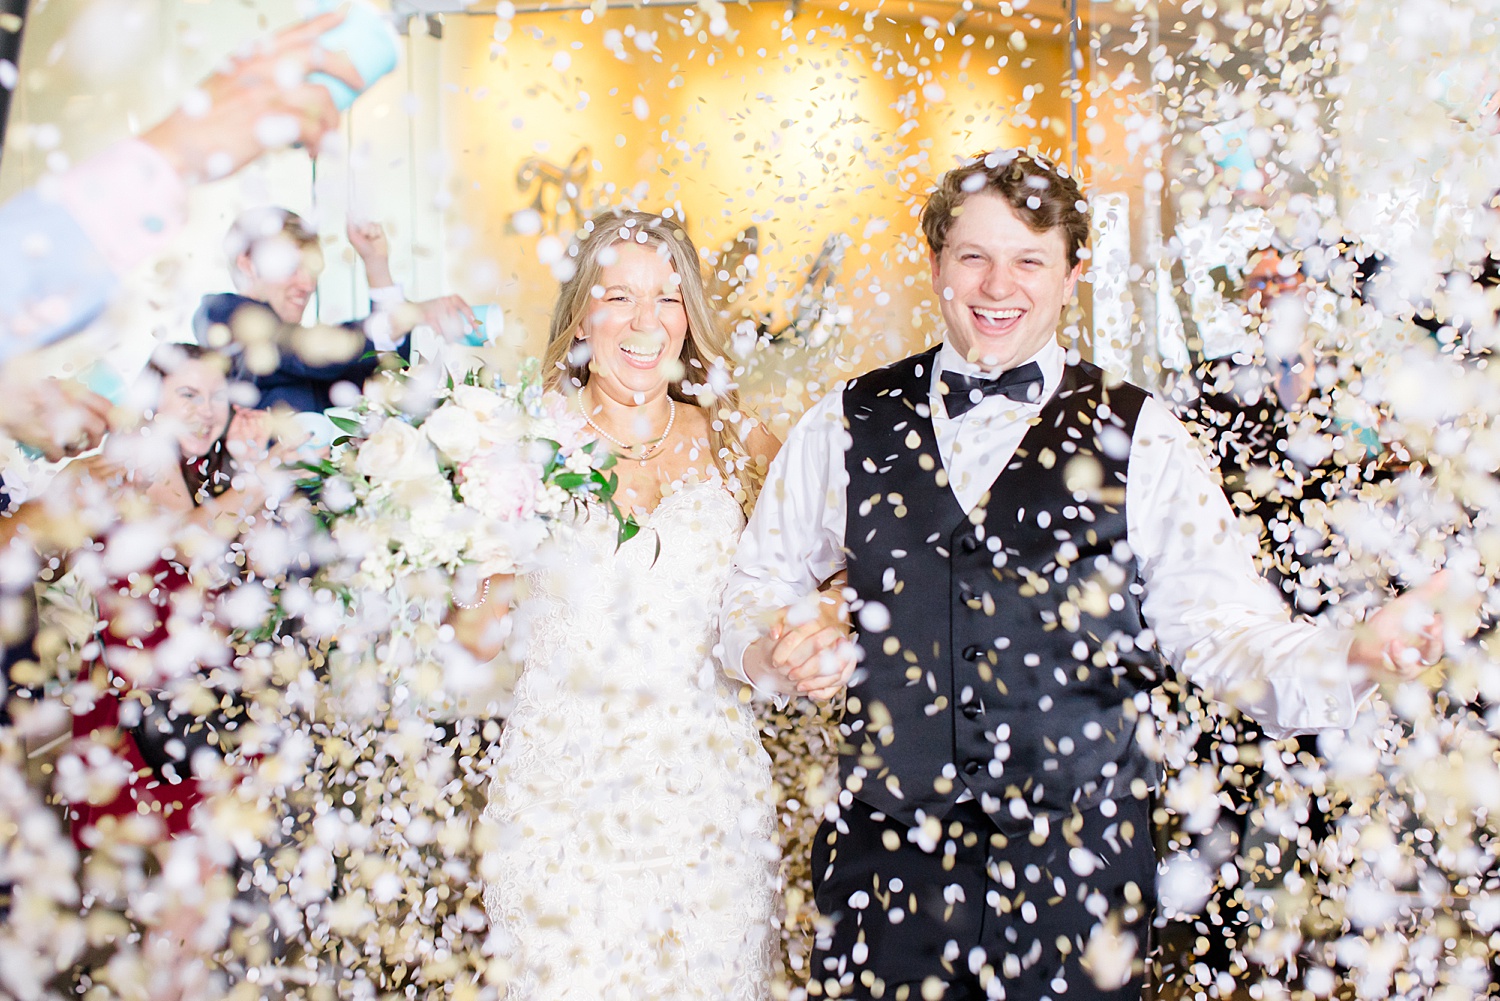 newlyweds exit reception as guests throw confetti 